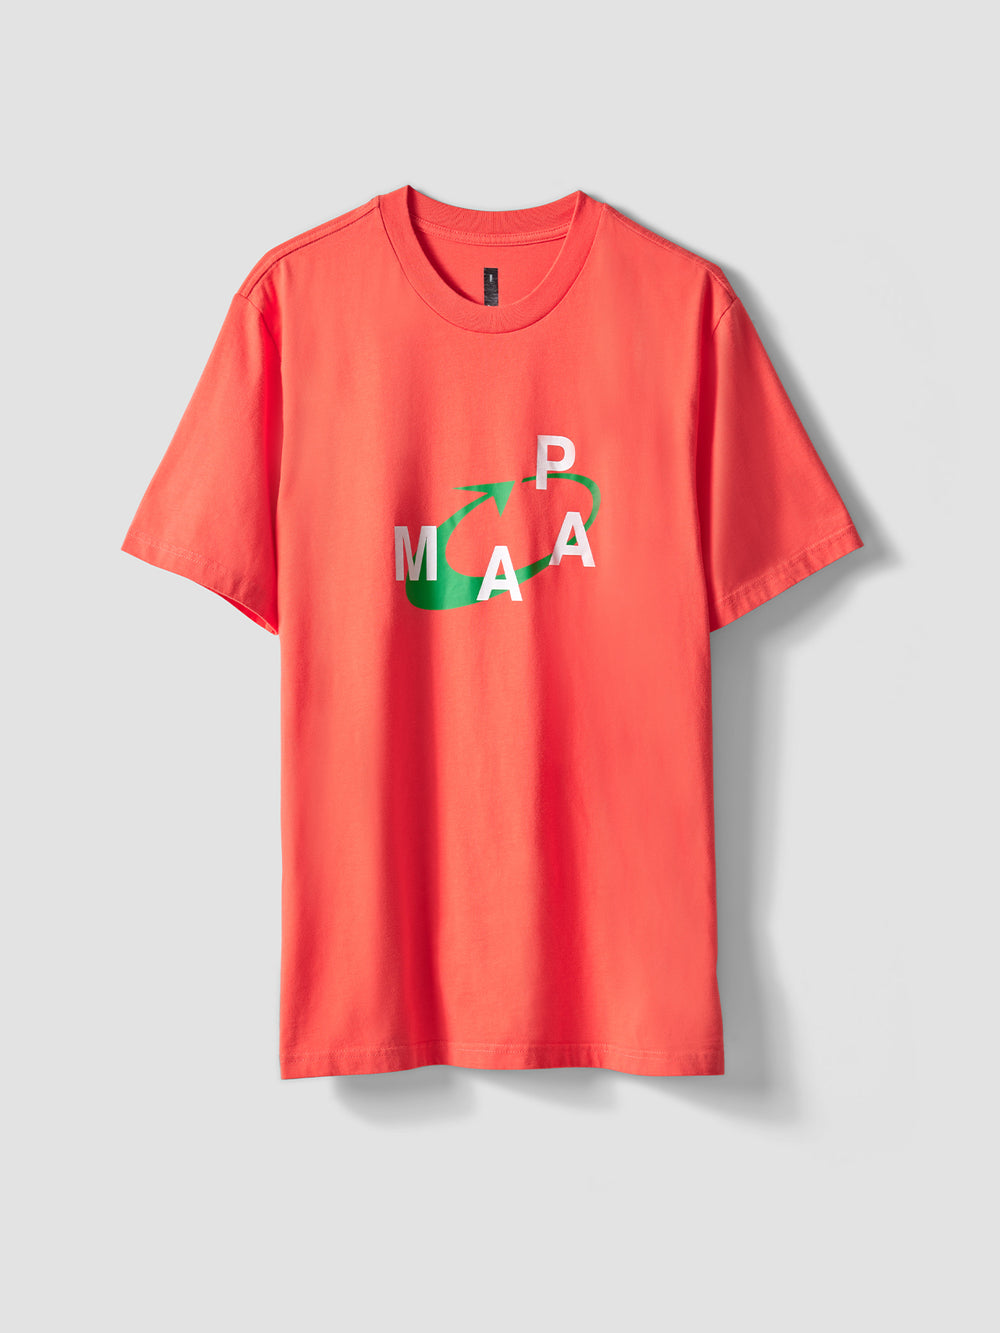 Product Image for MAAP X PAM Print Tee